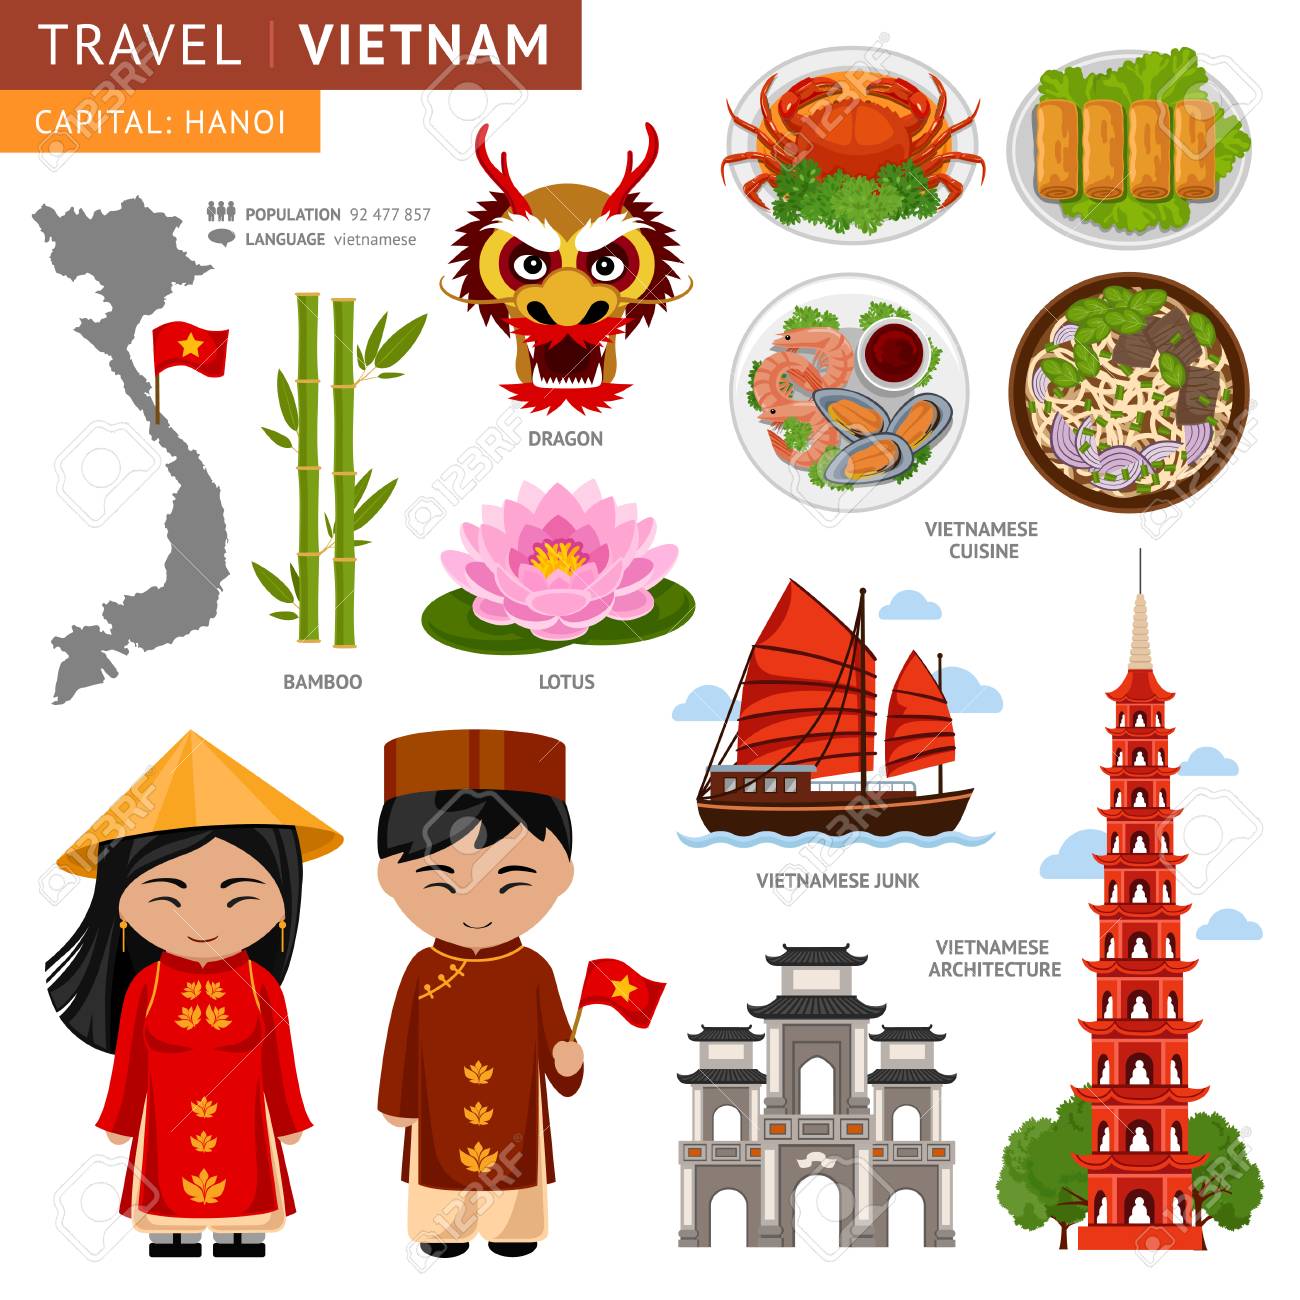 105136887-travel-to-vietnam-set-of-traditional-cultural-symbols-a-collection-of-colorful-illustrations-for-the.jpg